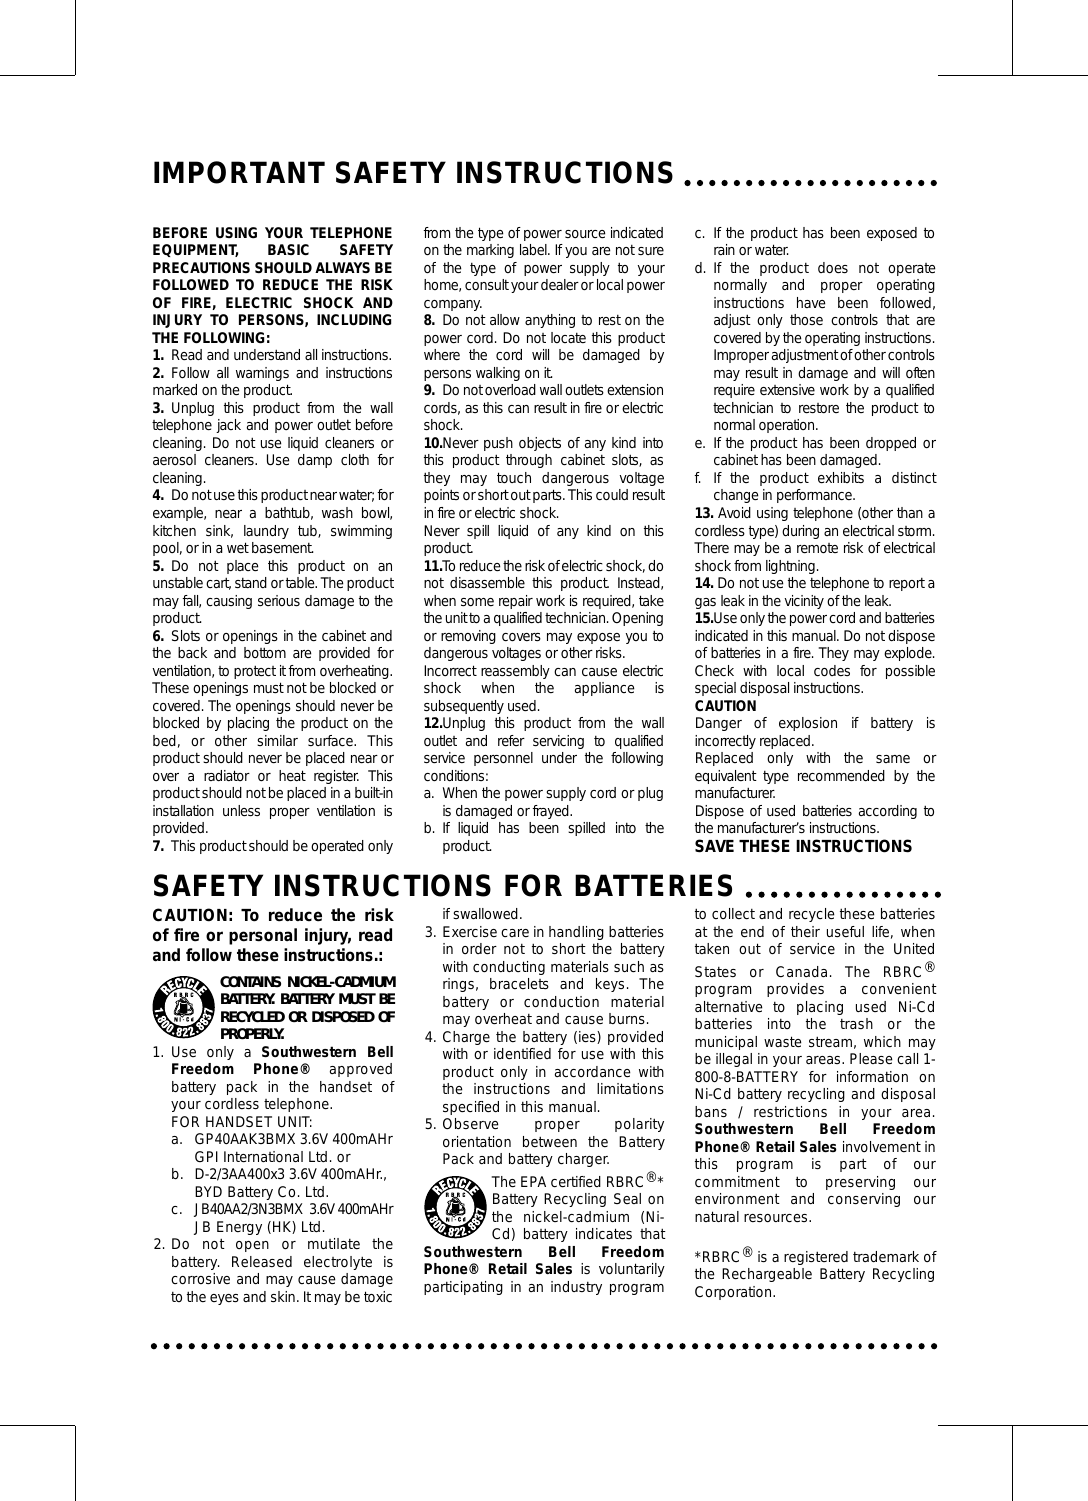 IMPORTANT SAFETY INSTRUCTIONSBEFORE USING YOUR TELEPHONEEQUIPMENT, BASIC SAFETYPRECAUTIONS SHOULD ALWAYS BEFOLLOWED TO REDUCE THE RISKOF FIRE, ELECTRIC SHOCK ANDINJURY TO PERSONS, INCLUDINGTHE FOLLOWING:1. Read and understand all instructions.2. Follow all warnings and instructionsmarked on the product.3. Unplug this product from the walltelephone jack and power outlet beforecleaning. Do not use liquid cleaners oraerosol cleaners. Use damp cloth forcleaning.4. Do not use this product near water; forexample, near a bathtub, wash bowl,kitchen sink, laundry tub, swimmingpool, or in a wet basement.5. Do not place this product on anunstable cart, stand or table. The productmay fall, causing serious damage to theproduct.6. Slots or openings in the cabinet andthe back and bottom are provided forventilation, to protect it from overheating.These openings must not be blocked orcovered. The openings should never beblocked by placing the product on thebed, or other similar surface. Thisproduct should never be placed near orover a radiator or heat register. Thisproduct should not be placed in a built-ininstallation unless proper ventilation isprovided.7. This product should be operated onlyfrom the type of power source indicatedon the marking label. If you are not sureof the type of power supply to yourhome, consult your dealer or local powercompany.8. Do not allow anything to rest on thepower cord. Do not locate this productwhere the cord will be damaged bypersons walking on it.9. Do not overload wall outlets extensioncords, as this can result in fire or electricshock.10.Never push objects of any kind intothis product through cabinet slots, asthey may touch dangerous voltagepoints or short out parts. This could resultin fire or electric shock.Never spill liquid of any kind on thisproduct.11.To reduce the risk of electric shock, donot disassemble this product. Instead,when some repair work is required, takethe unit to a qualified technician. Openingor removing covers may expose you todangerous voltages or other risks.Incorrect reassembly can cause electricshock when the appliance issubsequently used.12.Unplug this product from the walloutlet and refer servicing to qualifiedservice personnel under the followingconditions:a. When the power supply cord or plugis damaged or frayed.b. If liquid has been spilled into theproduct.c. If the product has been exposed torain or water.d. If the product does not operatenormally and proper operatinginstructions have been followed,adjust only those controls that arecovered by the operating instructions.Improper adjustment of other controlsmay result in damage and will oftenrequire extensive work by a qualifiedtechnician to restore the product tonormal operation.e. If the product has been dropped orcabinet has been damaged.f. If the product exhibits a distinctchange in performance.13. Avoid using telephone (other than acordless type) during an electrical storm.There may be a remote risk of electricalshock from lightning.14. Do not use the telephone to report agas leak in the vicinity of the leak.15.Use only the power cord and batteriesindicated in this manual. Do not disposeof batteries in a fire. They may explode.Check with local codes for possiblespecial disposal instructions.CAUTIONDanger of explosion if battery isincorrectly replaced.Replaced only with the same orequivalent type recommended by themanufacturer.Dispose of used batteries according tothe manufacturer’s instructions.SAVE THESE INSTRUCTIONSSAFETY INSTRUCTIONS FOR BATTERIESCAUTION: To reduce the riskof fire or personal injury, readand follow these instructions.:CONTAINS NICKEL-CADMIUMBATTERY. BATTERY MUST BERECYCLED OR DISPOSED OFPROPERLY.1. Use only a Southwestern BellFreedom Phone® approvedbattery pack in the handset ofyour cordless telephone.FOR HANDSET UNIT:a. GP40AAK3BMX 3.6V 400mAHrGPI International Ltd. orb. D-2/3AA400x3 3.6V 400mAHr.,BYD Battery Co. Ltd.c. JB40AA2/3N3BMX  3.6V 400mAHrJB Energy (HK) Ltd.2. Do not open or mutilate thebattery. Released electrolyte iscorrosive and may cause damageto the eyes and skin. It may be toxicif swallowed.3. Exercise care in handling batteriesin order not to short the batterywith conducting materials such asrings, bracelets and keys. Thebattery or conduction materialmay overheat and cause burns.4. Charge the battery (ies) providedwith or identified for use with thisproduct only in accordance withthe instructions and limitationsspecified in this manual.5. Observe proper polarityorientation between the BatteryPack and battery charger.The EPA certified RBRC®*Battery Recycling Seal onthe nickel-cadmium (Ni-Cd) battery indicates thatSouthwestern Bell FreedomPhone® Retail Sales is voluntarilyparticipating in an industry programto collect and recycle these batteriesat the end of their useful life, whentaken out of service in the UnitedStates or Canada. The RBRC®program provides a convenientalternative to placing used Ni-Cdbatteries into the trash or themunicipal waste stream, which maybe illegal in your areas. Please call 1-800-8-BATTERY for information onNi-Cd battery recycling and disposalbans / restrictions in your area.Southwestern Bell FreedomPhone® Retail Sales involvement inthis program is part of ourcommitment to preserving ourenvironment and conserving ournatural resources.*RBRC®is a registered trademark ofthe Rechargeable Battery RecyclingCorporation.